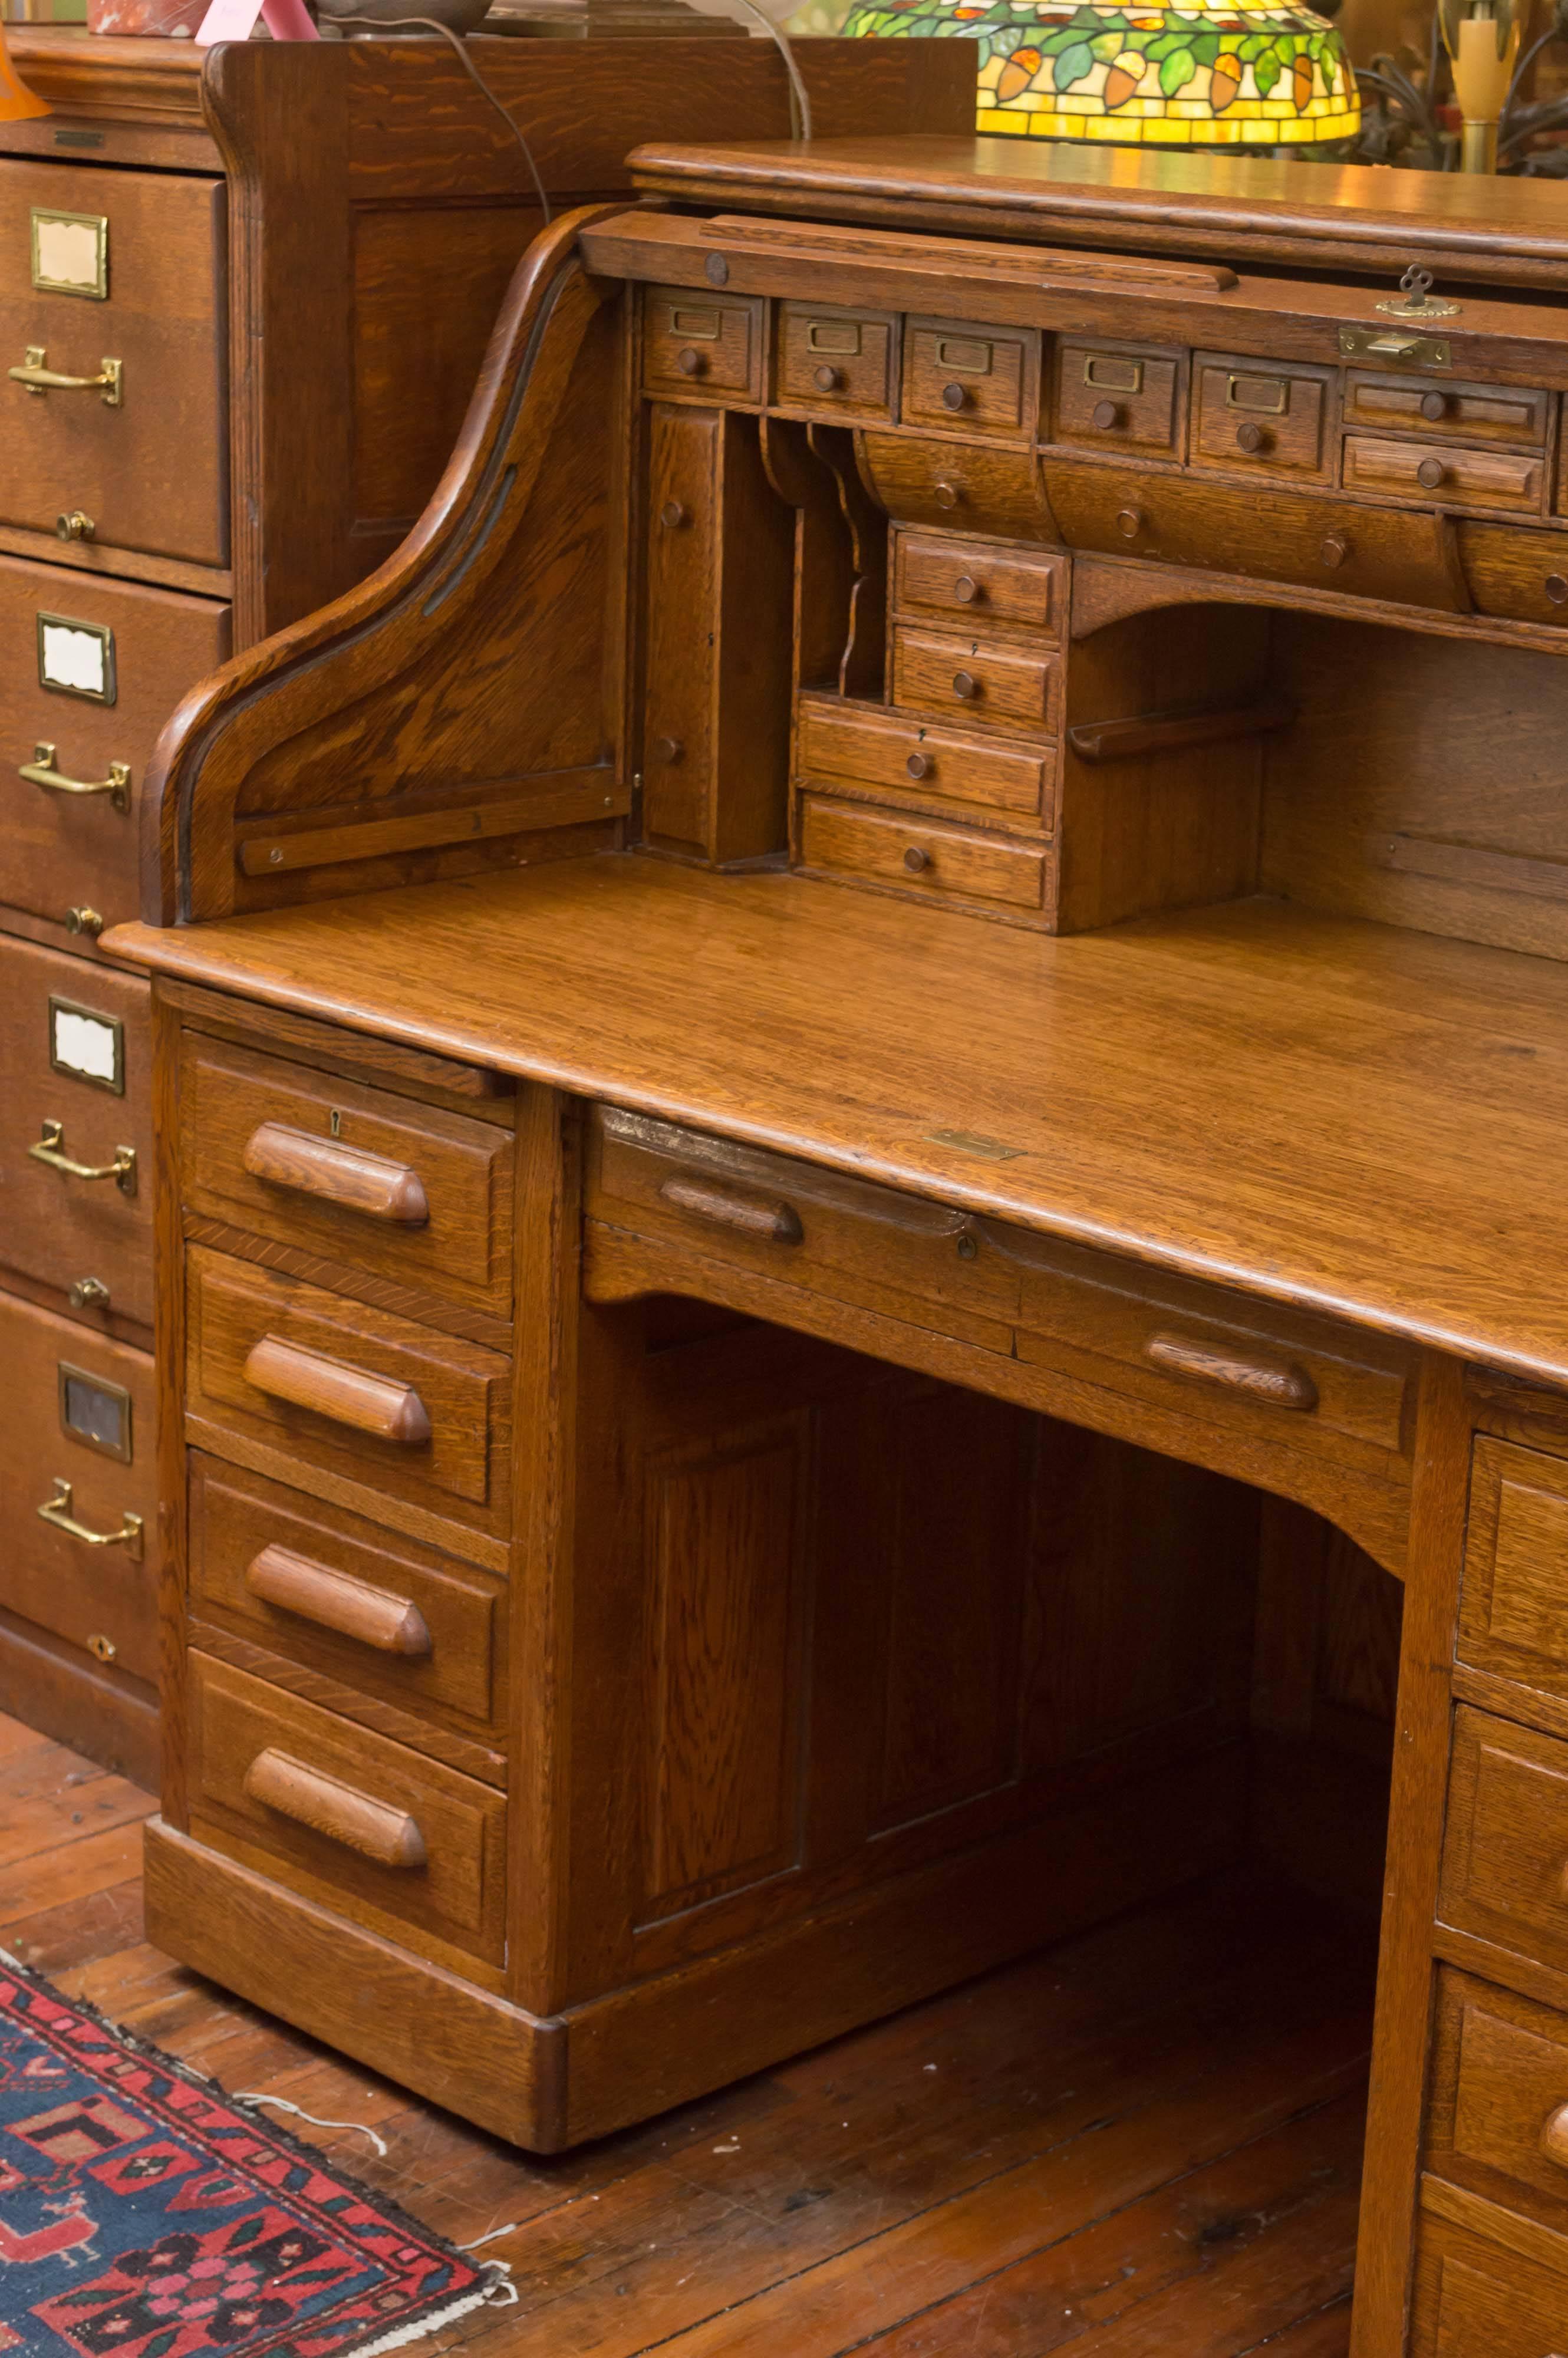 This is the desk people dream about owning. Quarter sawn oak, also known as 